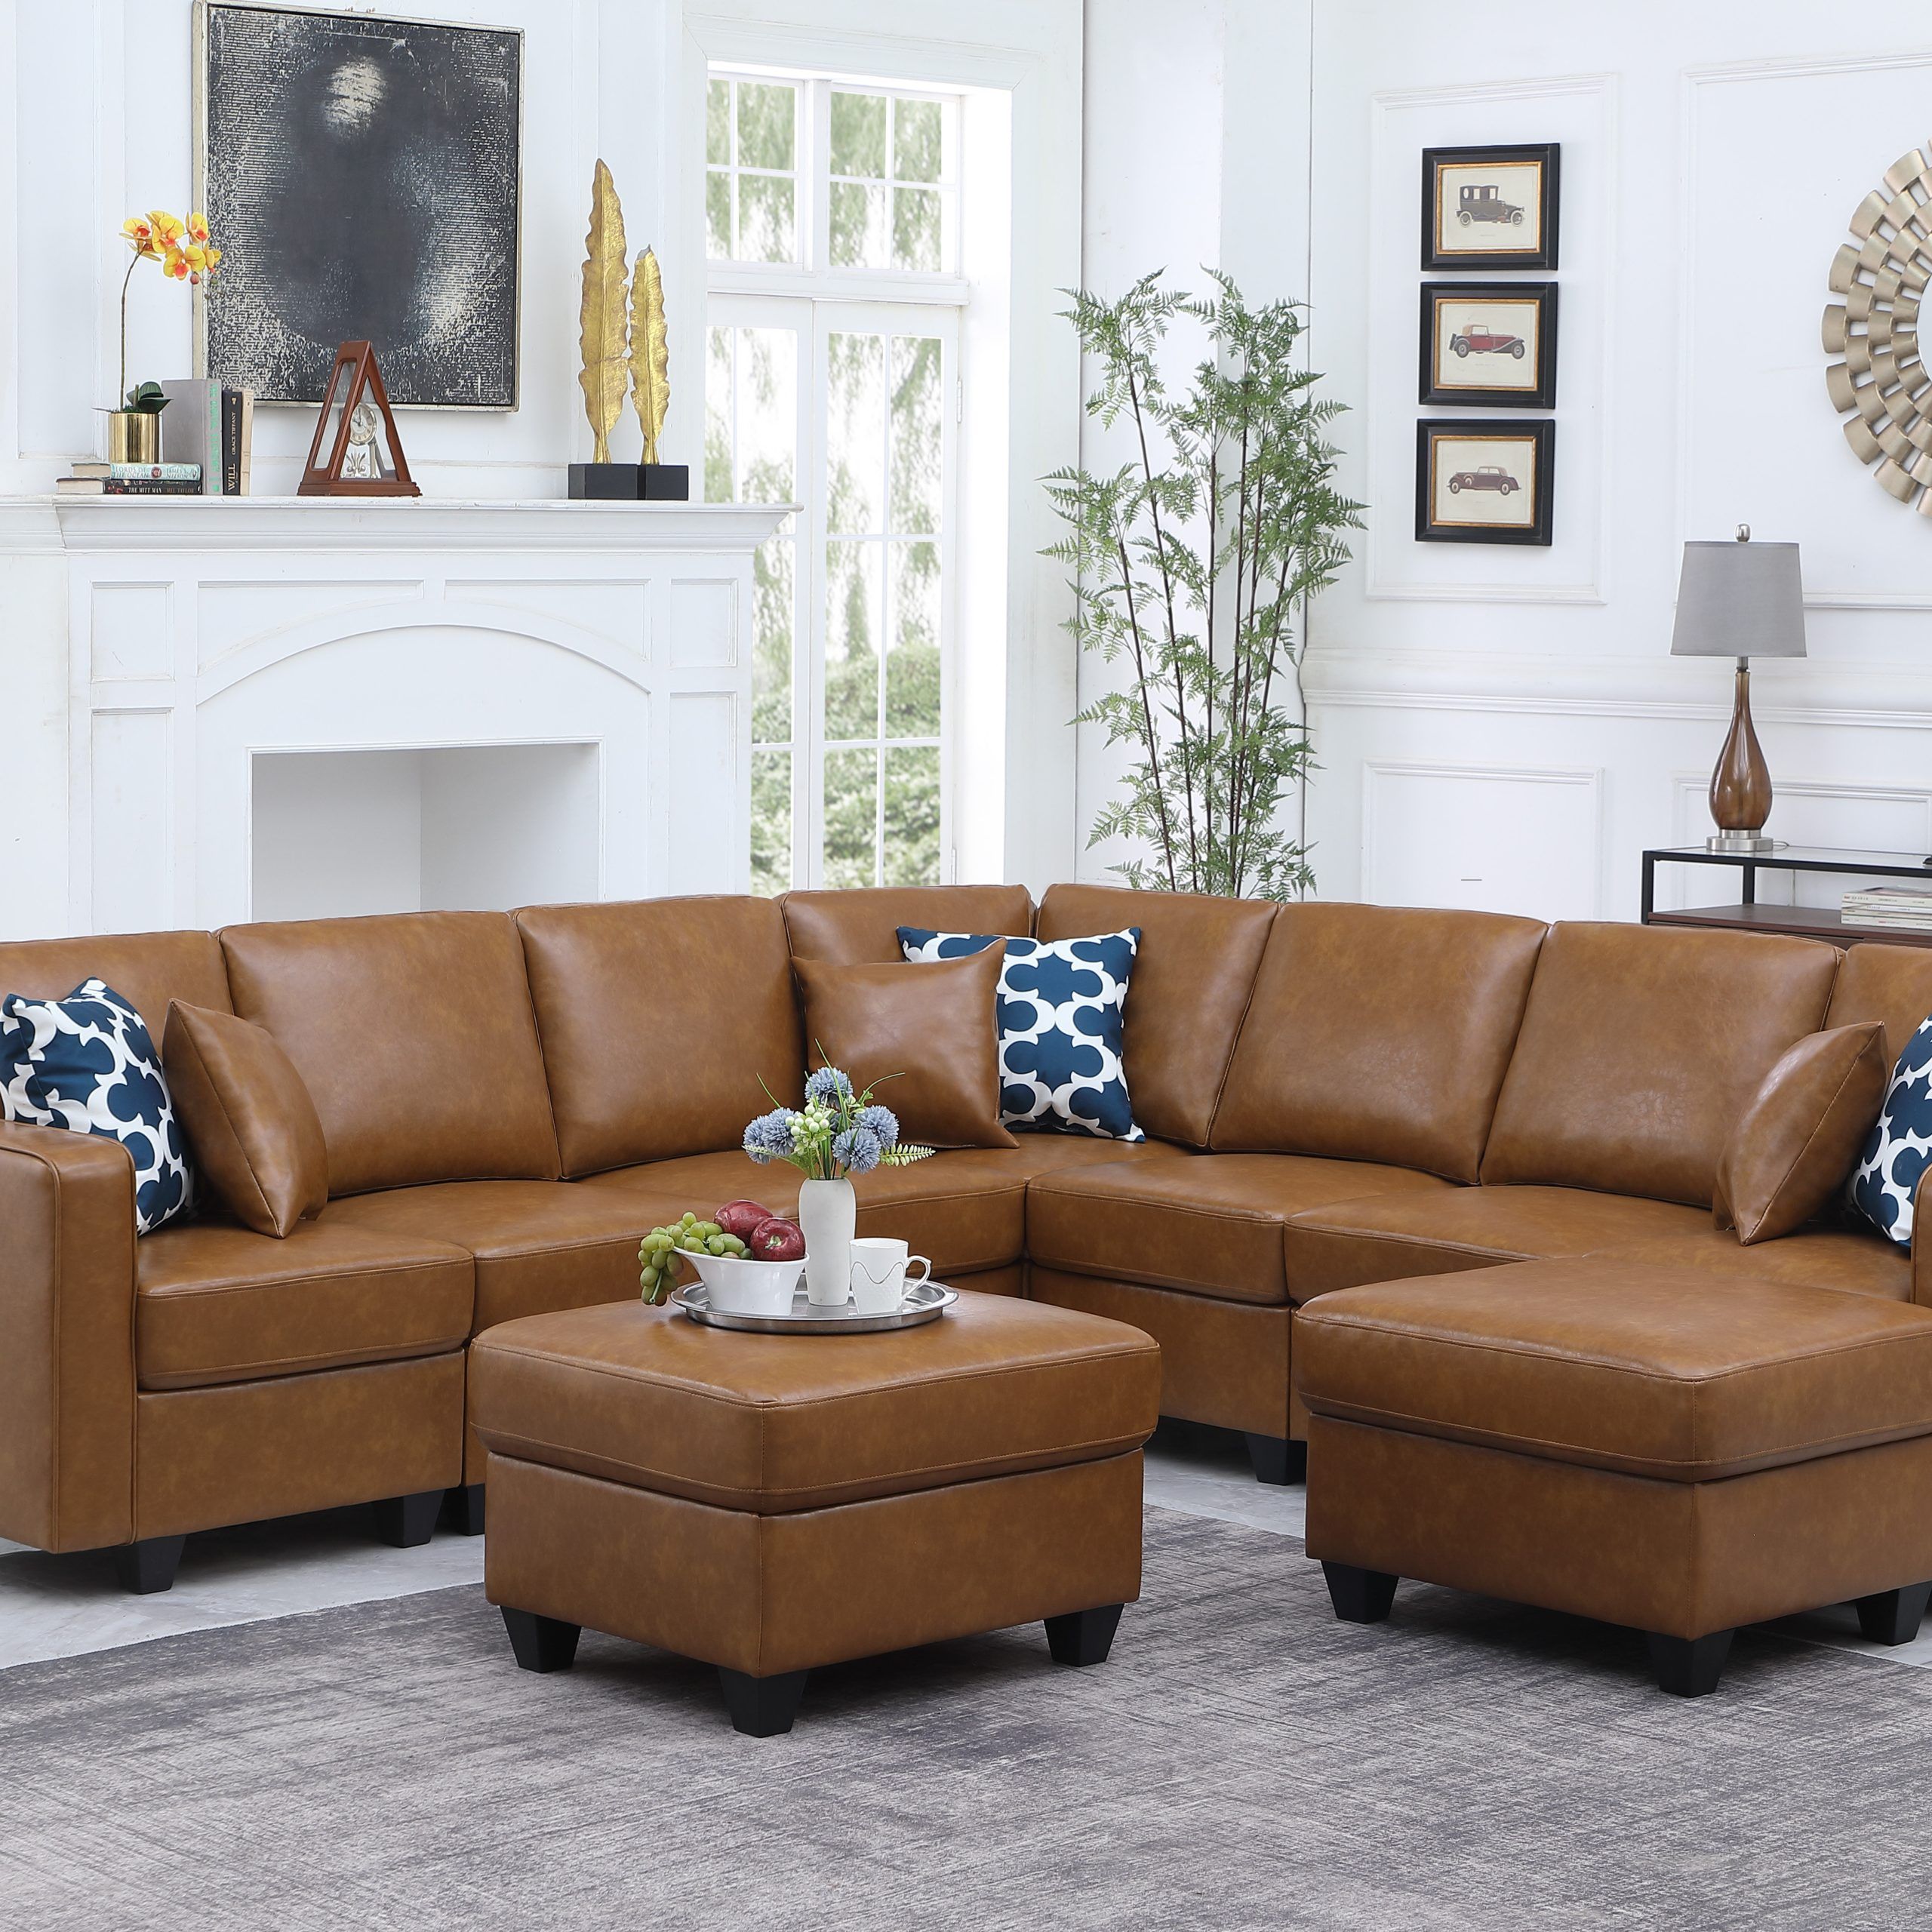 Devion Furniture 9 – Piece Vegan Leather Sectional & Reviews | Wayfair With Regard To Faux Leather Sectional Sofa Sets (View 6 of 15)